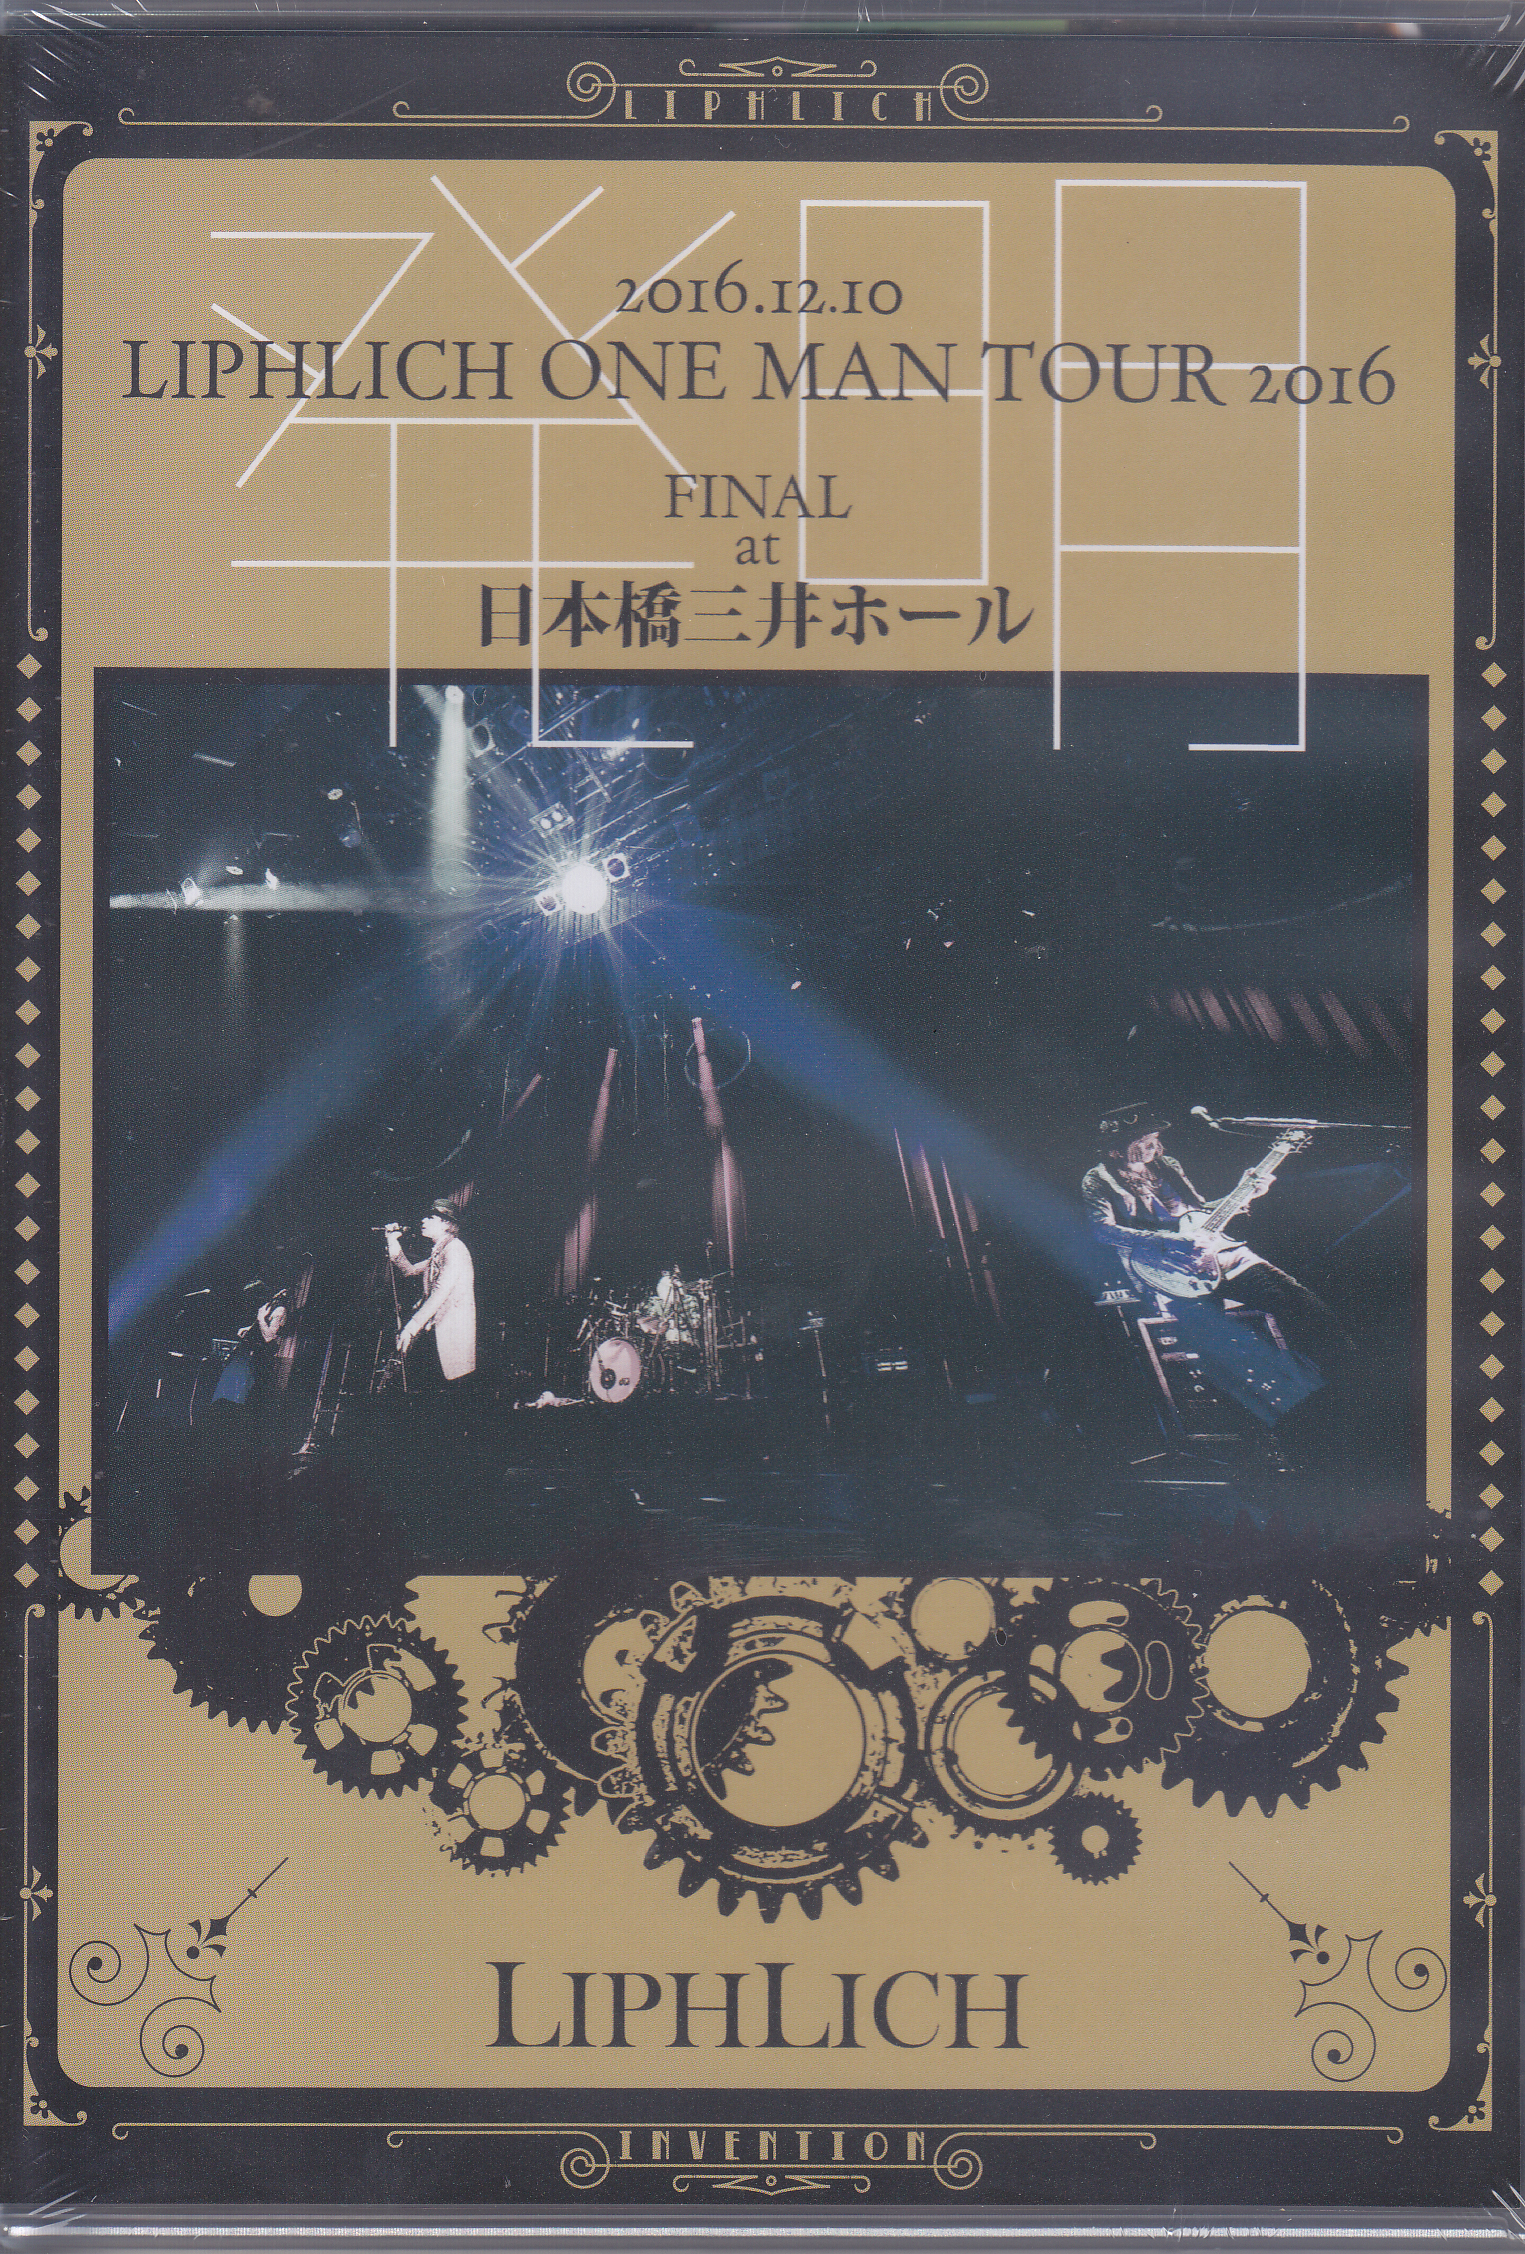 LIPHLICH ( リフリッチ )  の DVD 2016.12.10「LIPHLICH ONE MAN TOUR 2016 発明 FINAL」at 日本橋三井ホール